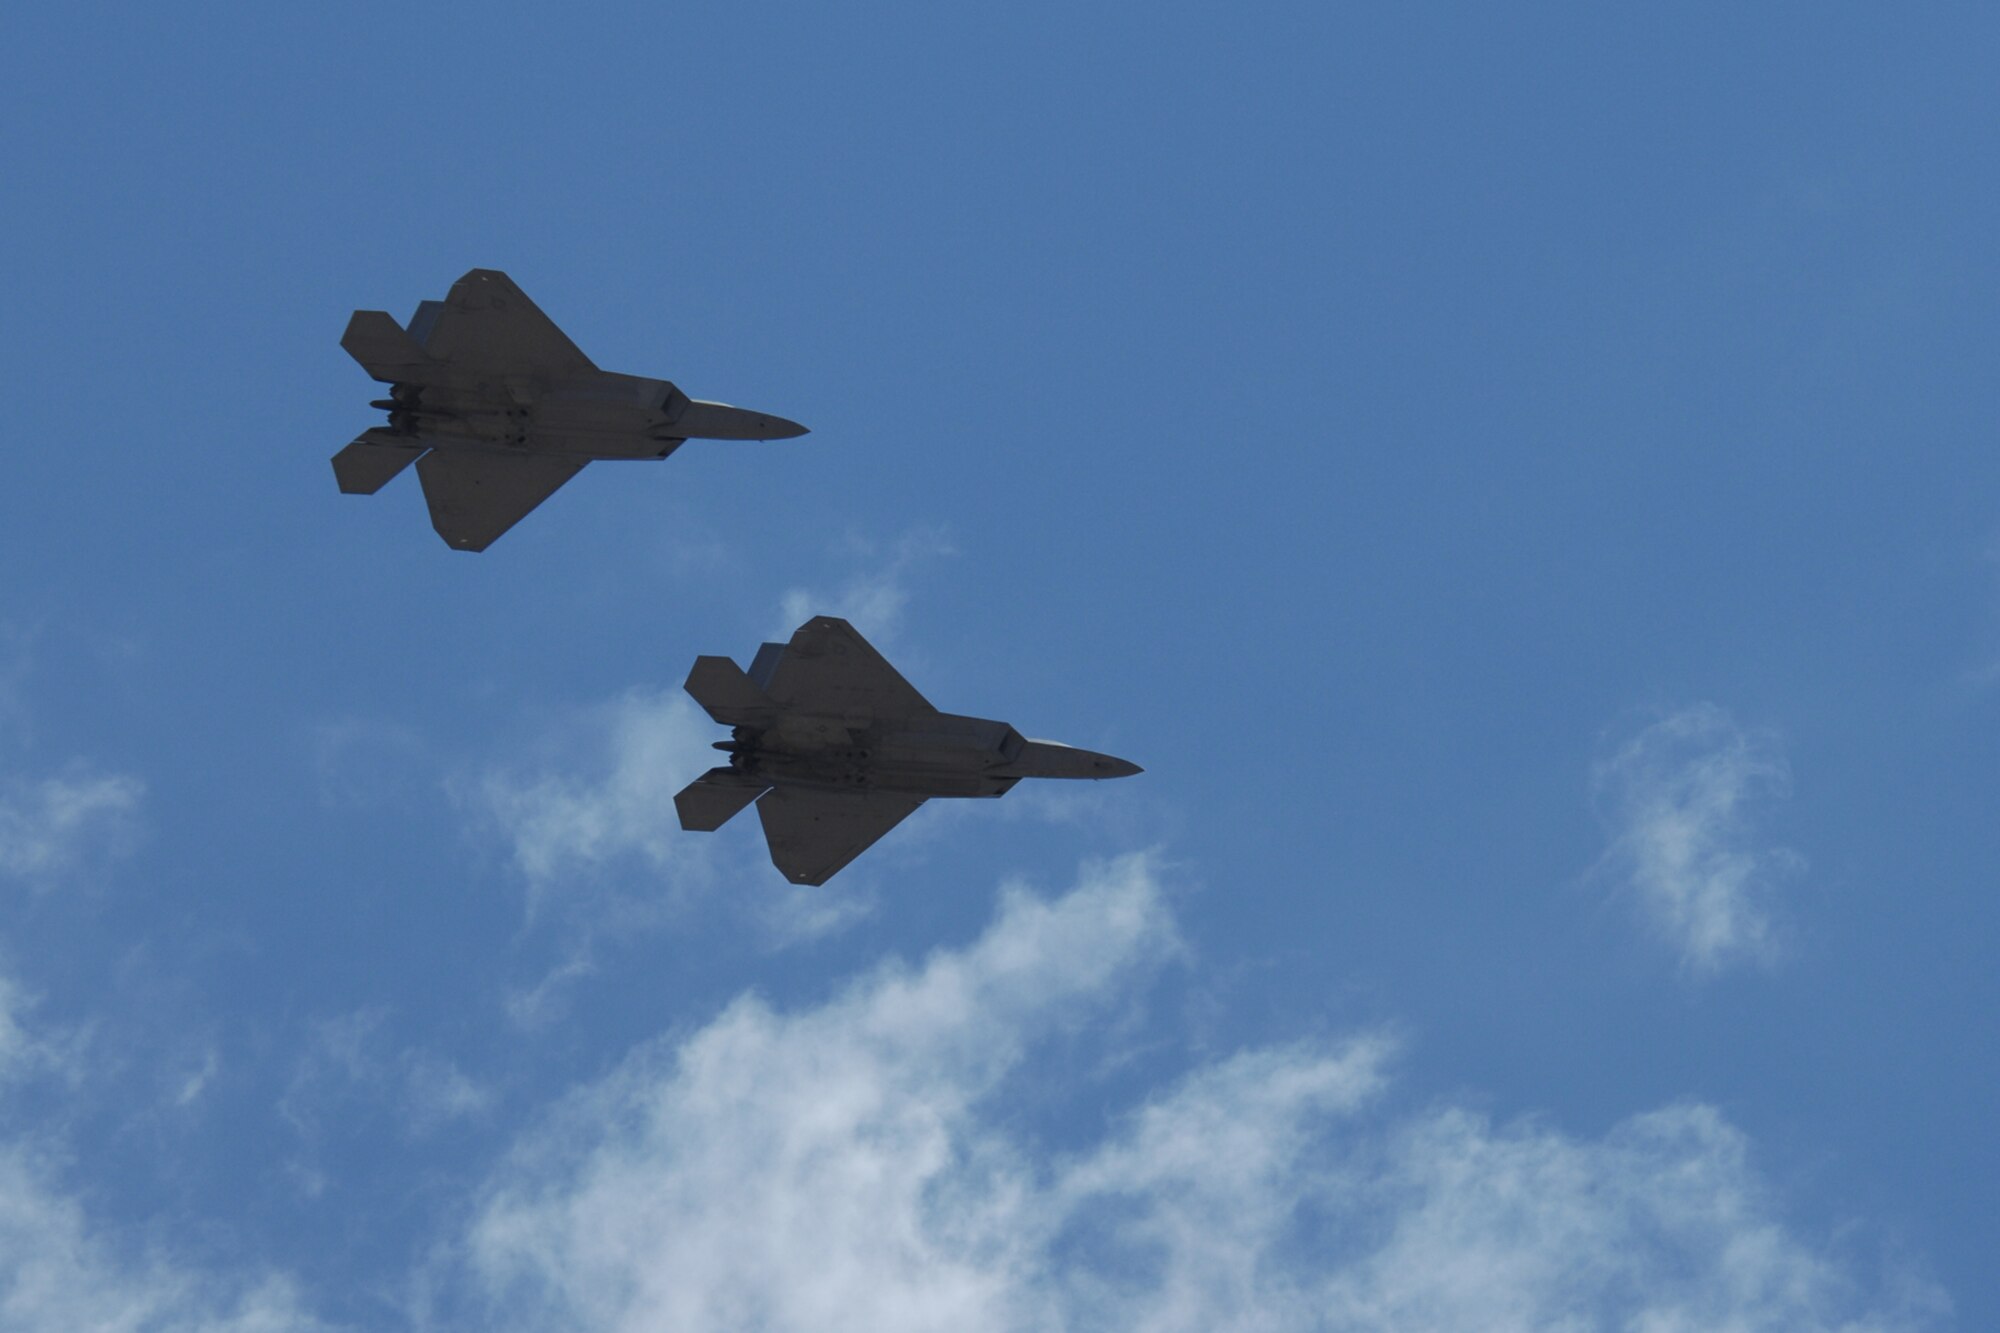 Col. Jeff Harrigian, 49th Fighter Wing commander, and Lt. Col. Mike Hernandez, 7th Fighter Squadron commander, fly a pair of F-22A Raptors over the skies of Holloman Air Force Base, N.M., June 2. Flying from Nellis Air Force Base, Nev., Colonel Harrigian's call sign was Sun 11 and Colonel Hernandez's call sign was Sun 12. The jets are the first two F-22s assigned to Holloman. (U.S. Air Force photo/Airman 1st Class Jamal D. Sutter)